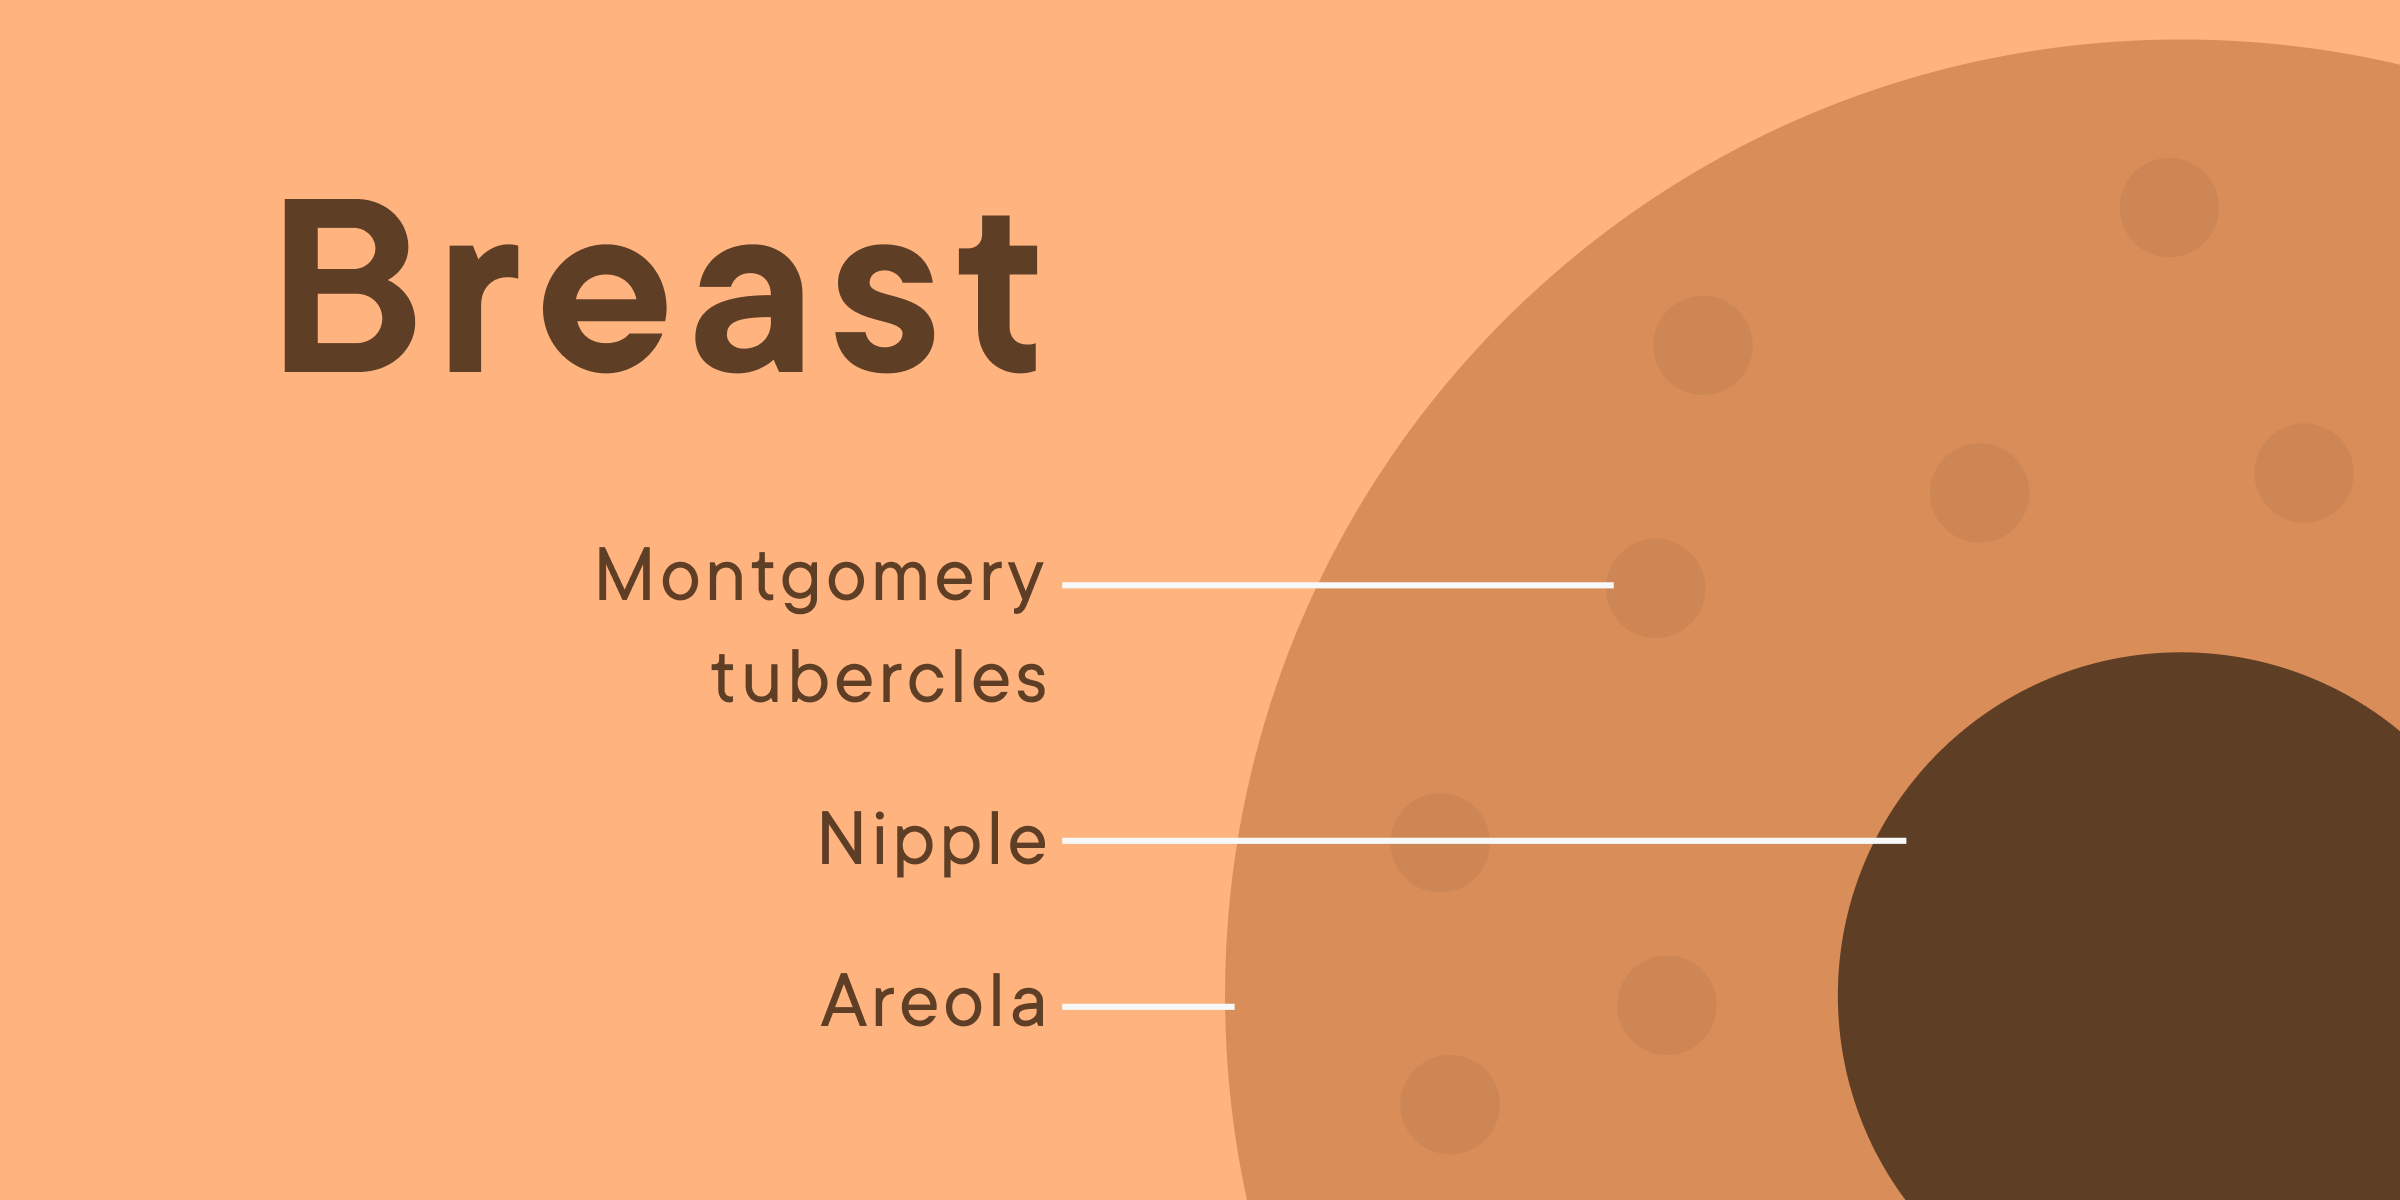 Diagram showing the breast, areola, nipple and Montgomery tubercles.